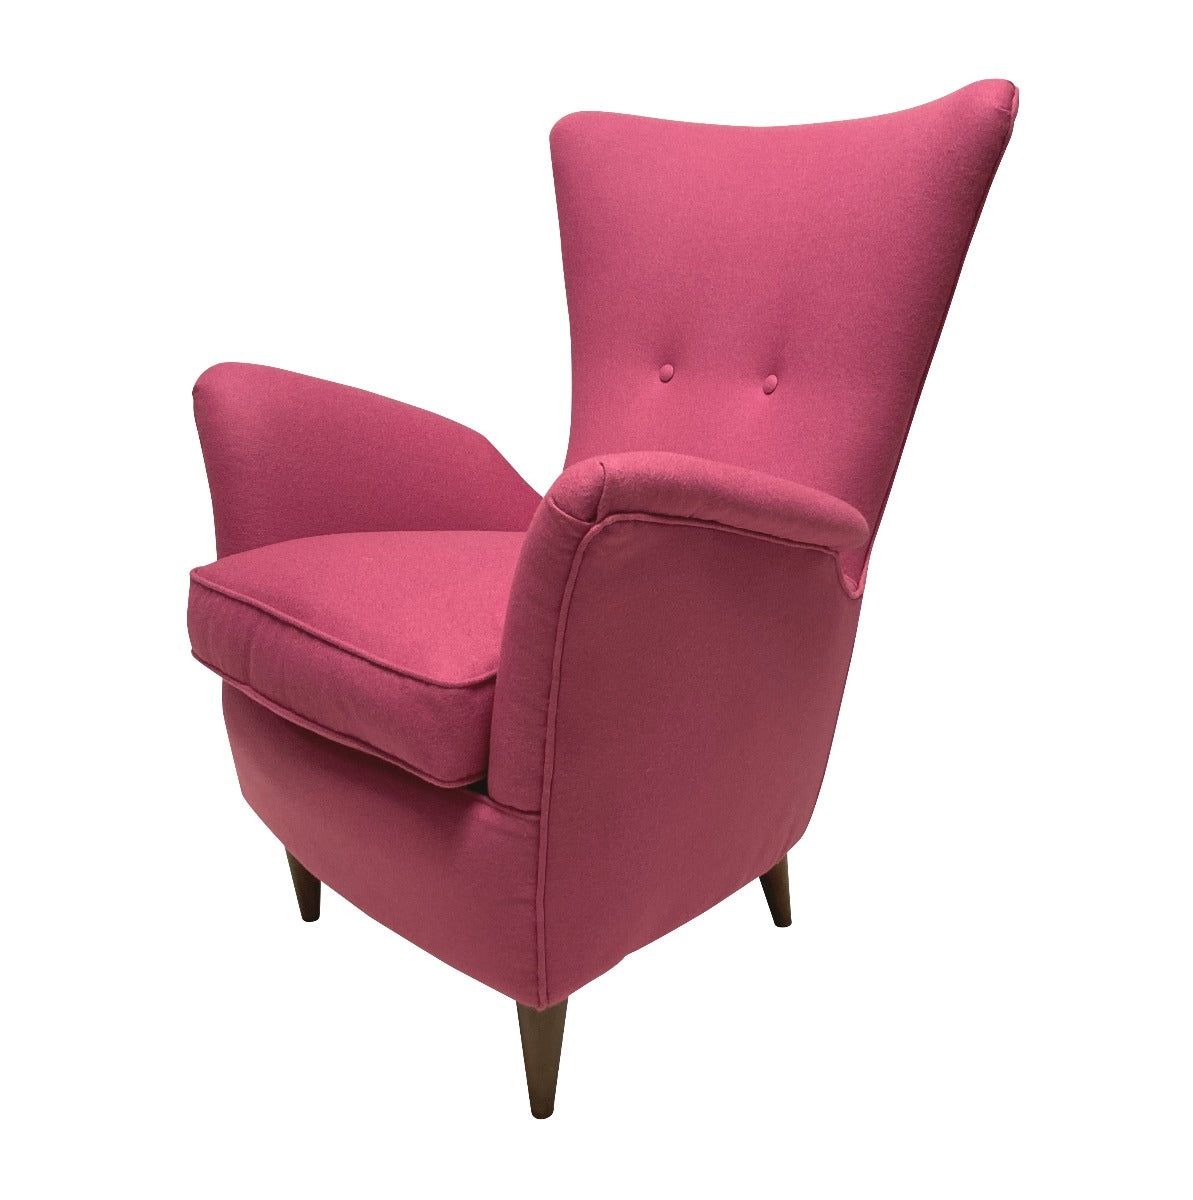 A Pair of Italian Mid-Century Pink Armchairs by Melchiore Bega